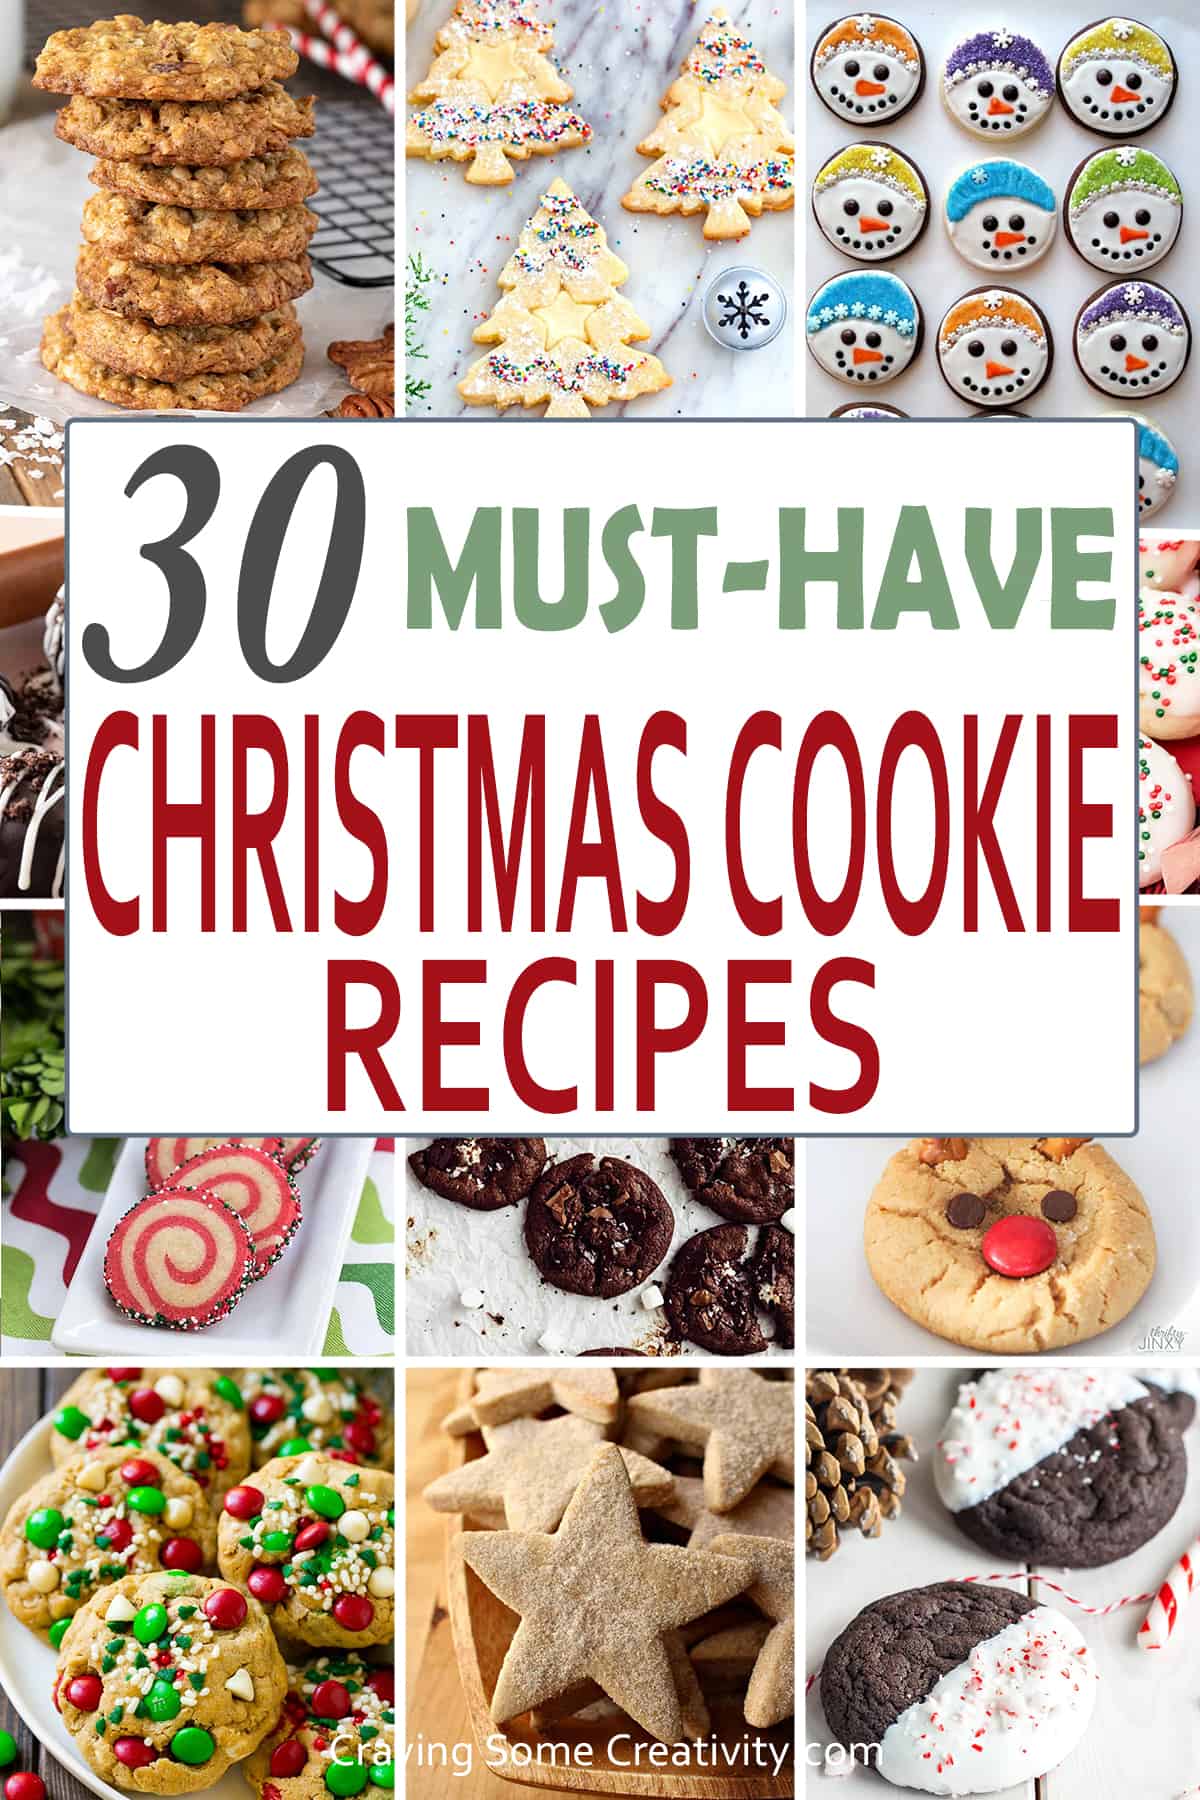 Collage of christmas cookie recipes including chocolate cookies, peppermint cookies, and red and green festive desserts.